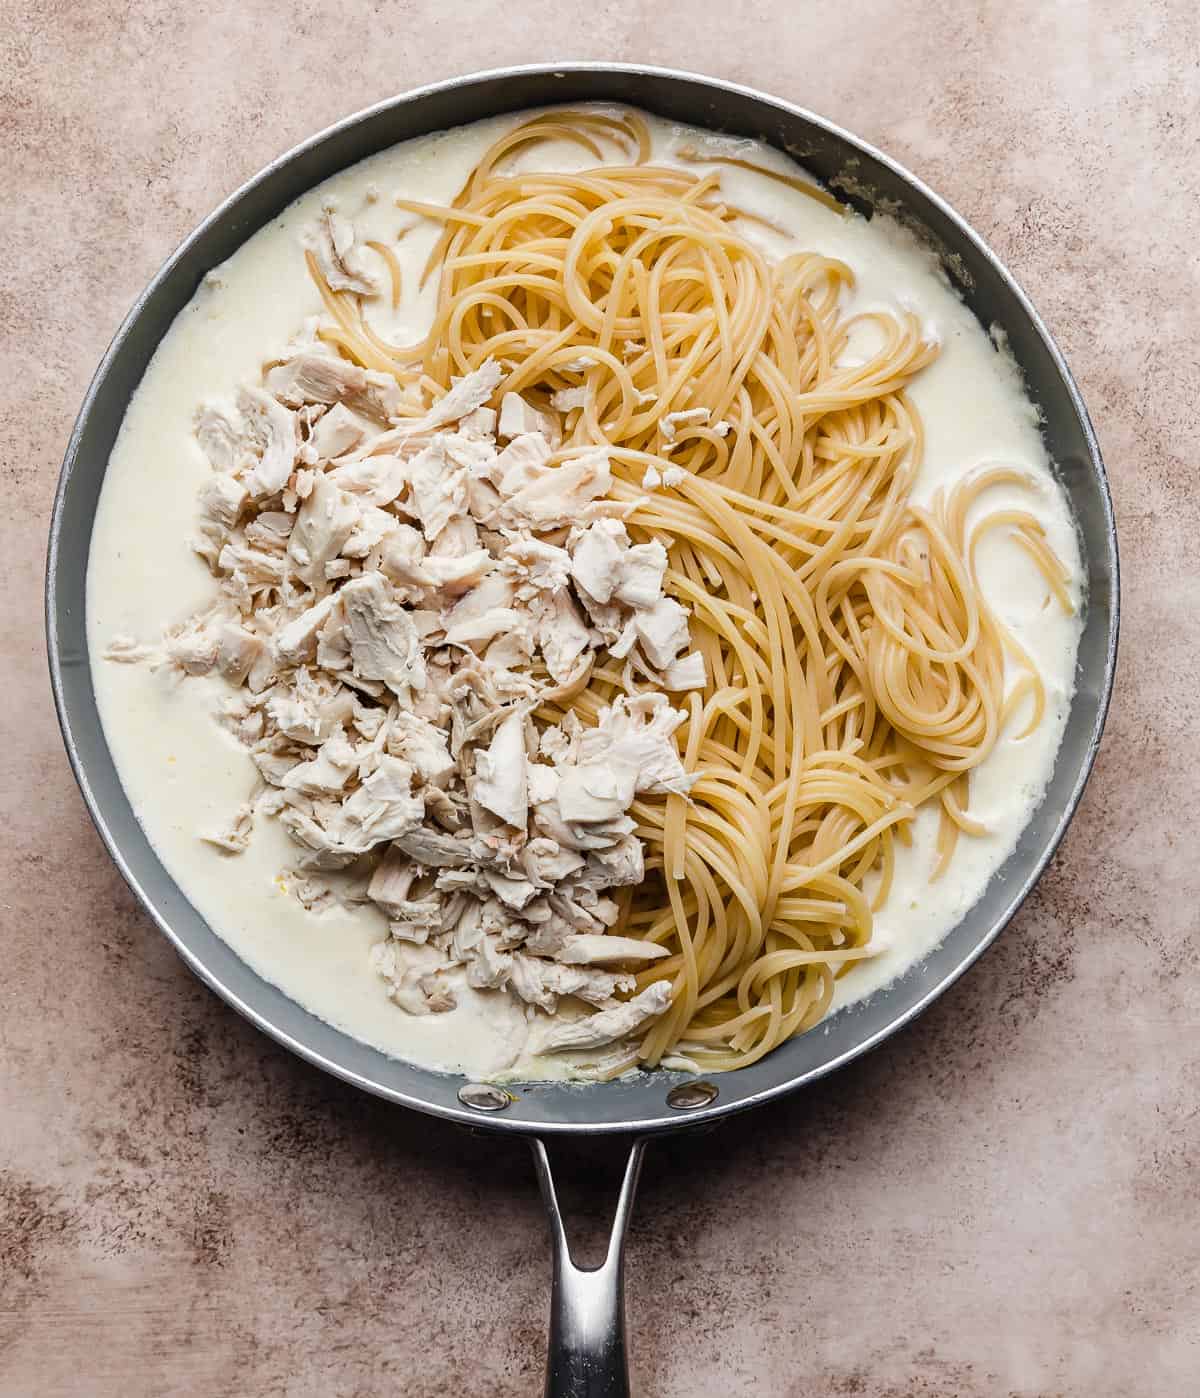 A grey skillet on a beige textured background with a lemon cream sauce, spaghetti noodles and chopped chicken in it.